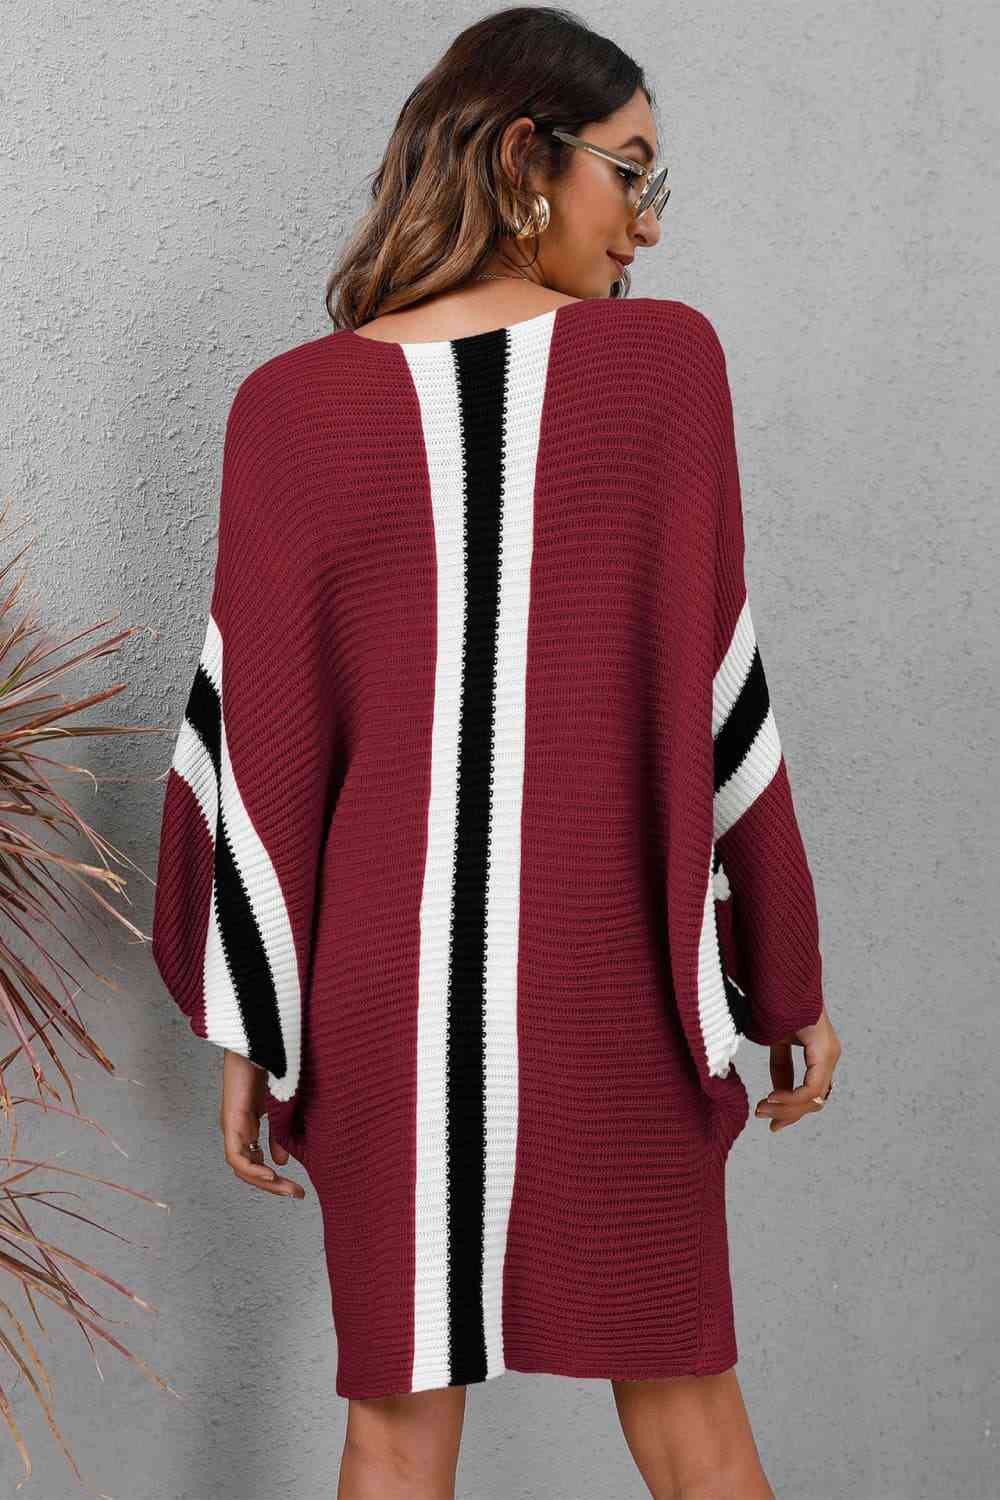 Trendsi Dresses Gypsy Oven Ribbed Round Neck Sweater Dress